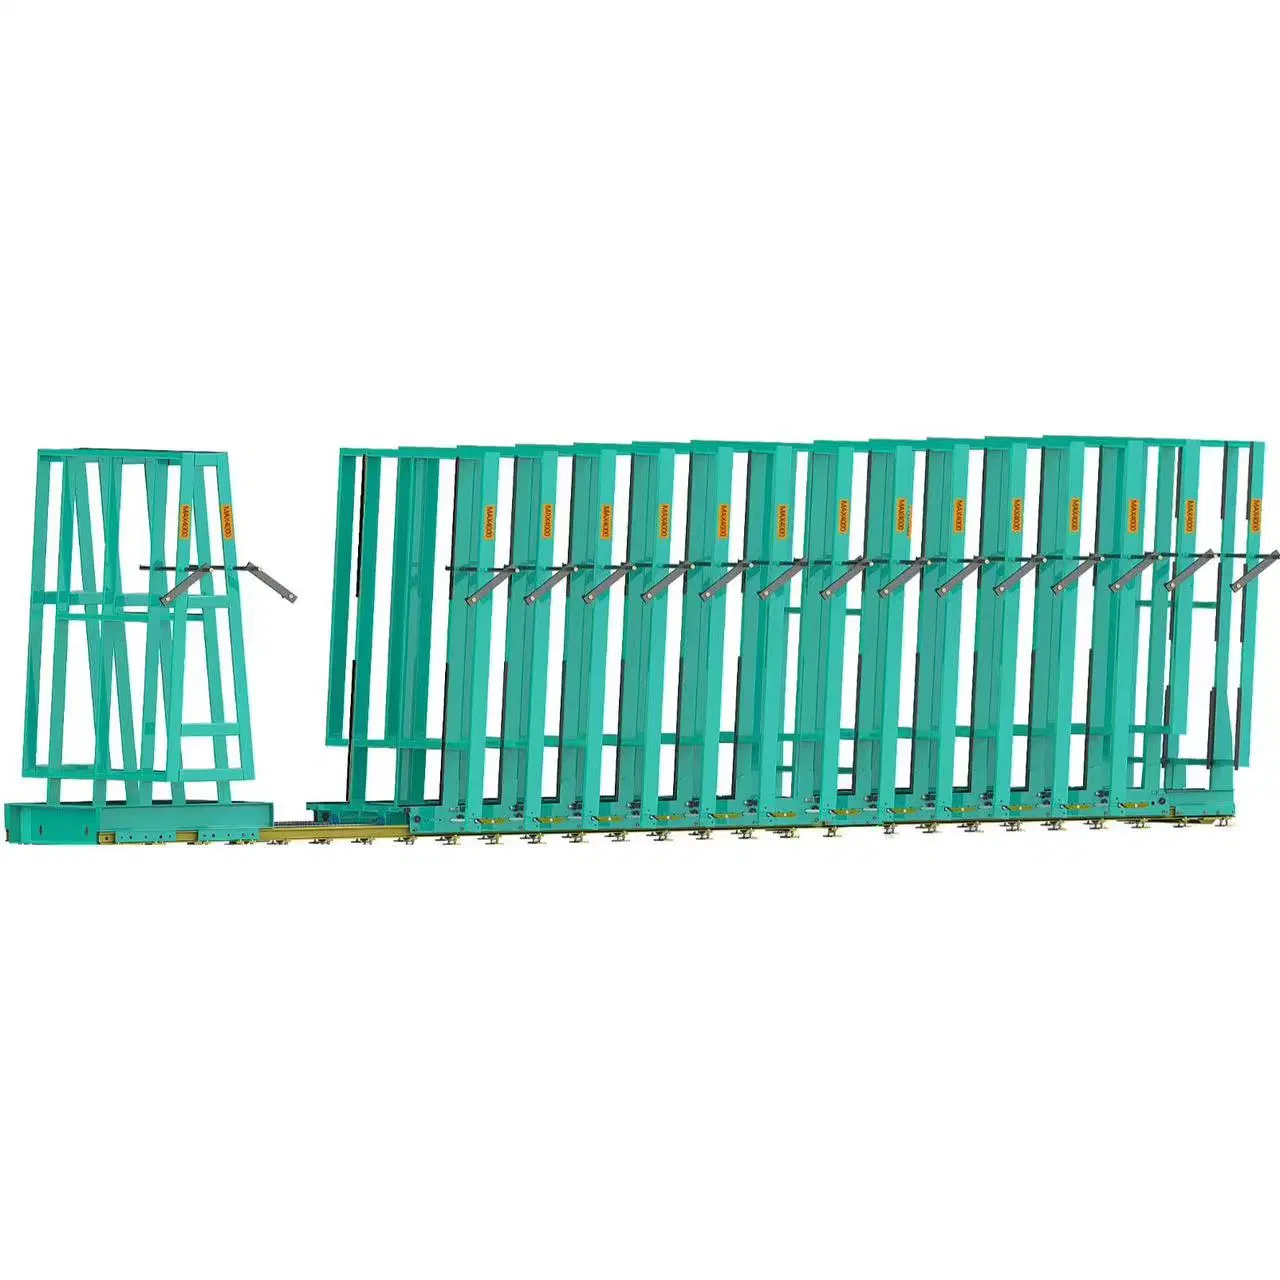 Removable Storage Glass Shelf for Standard Glass Storage and Transport in Warehouse